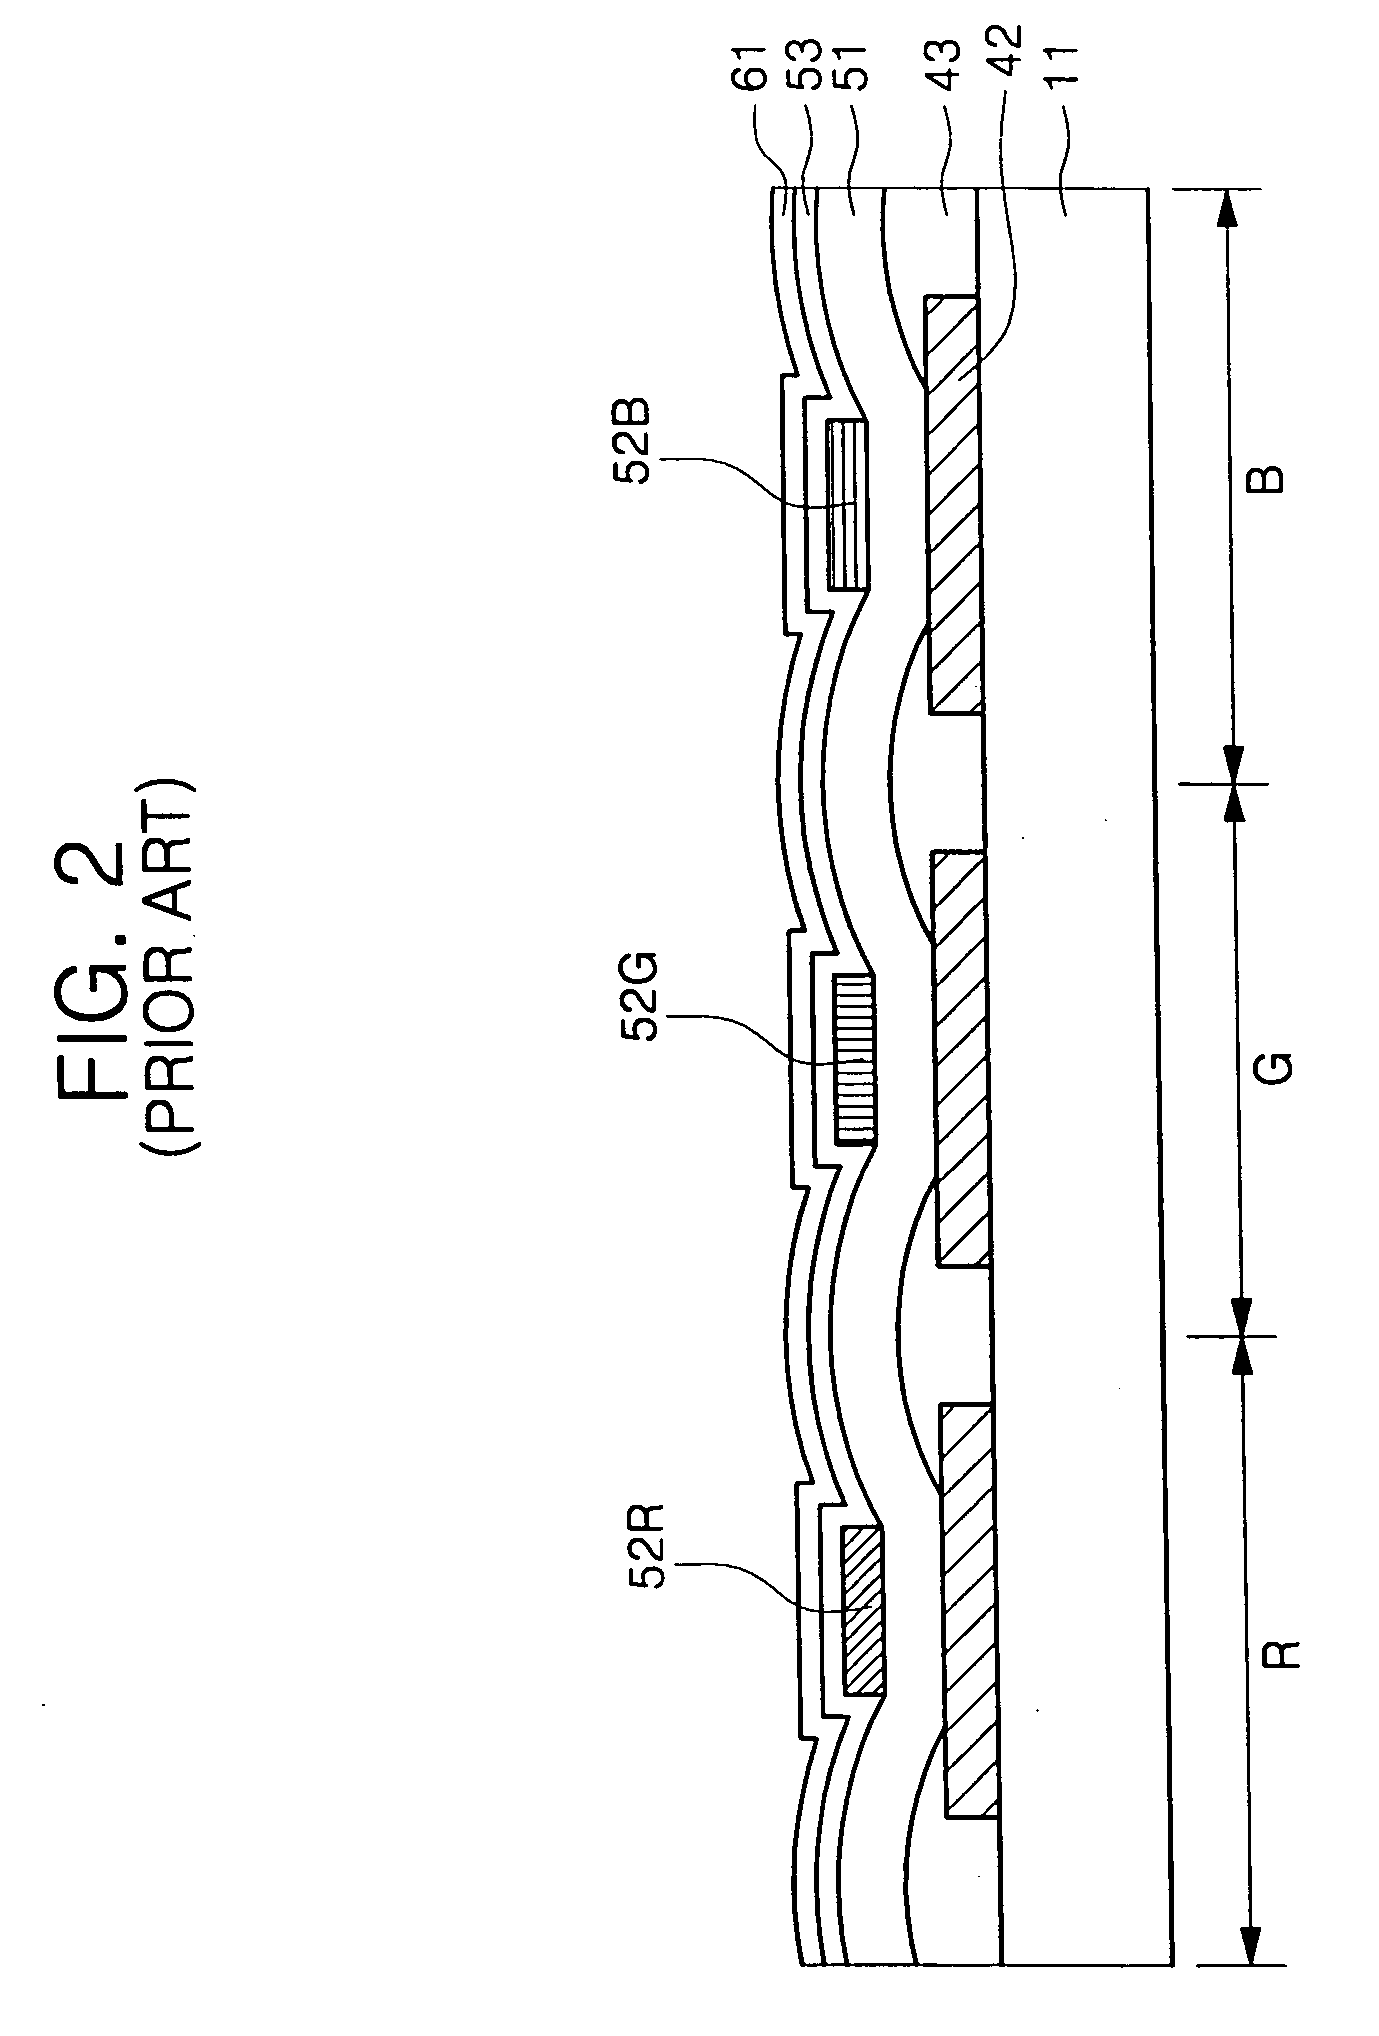 Full color organic electroluminescence display device